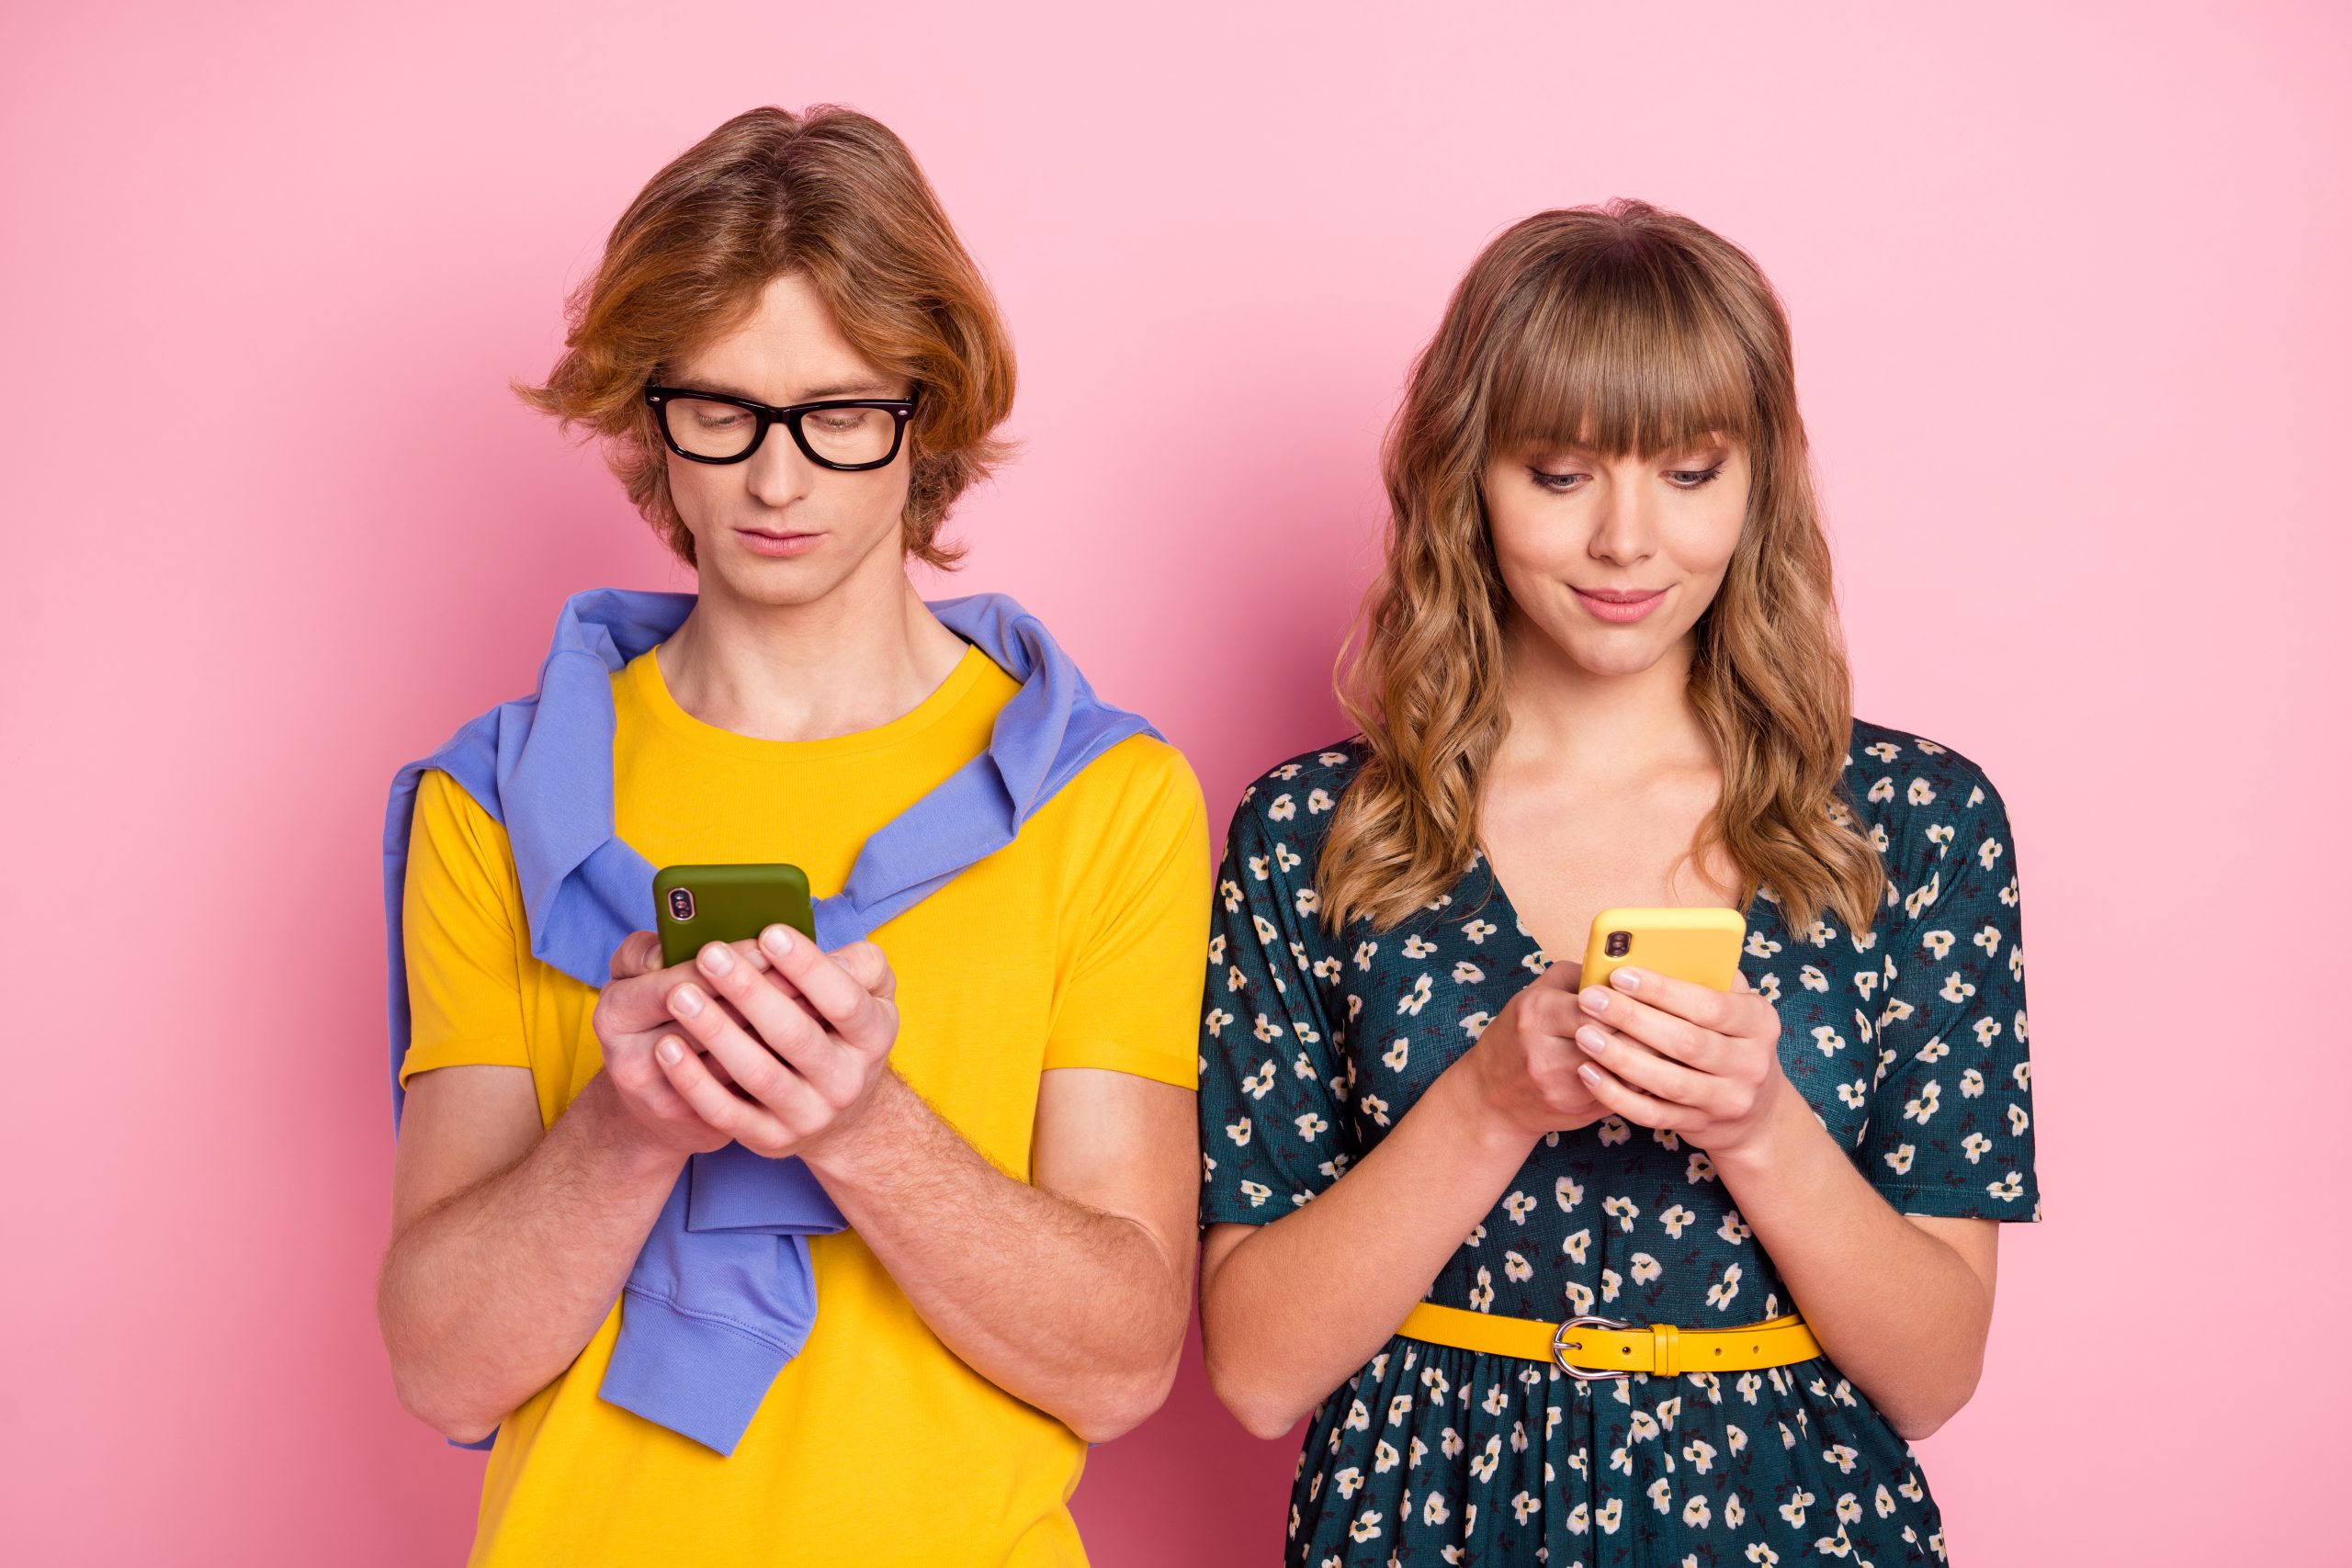 Two young people look down at their green and yellow smart phones while standing in front of a pink wall